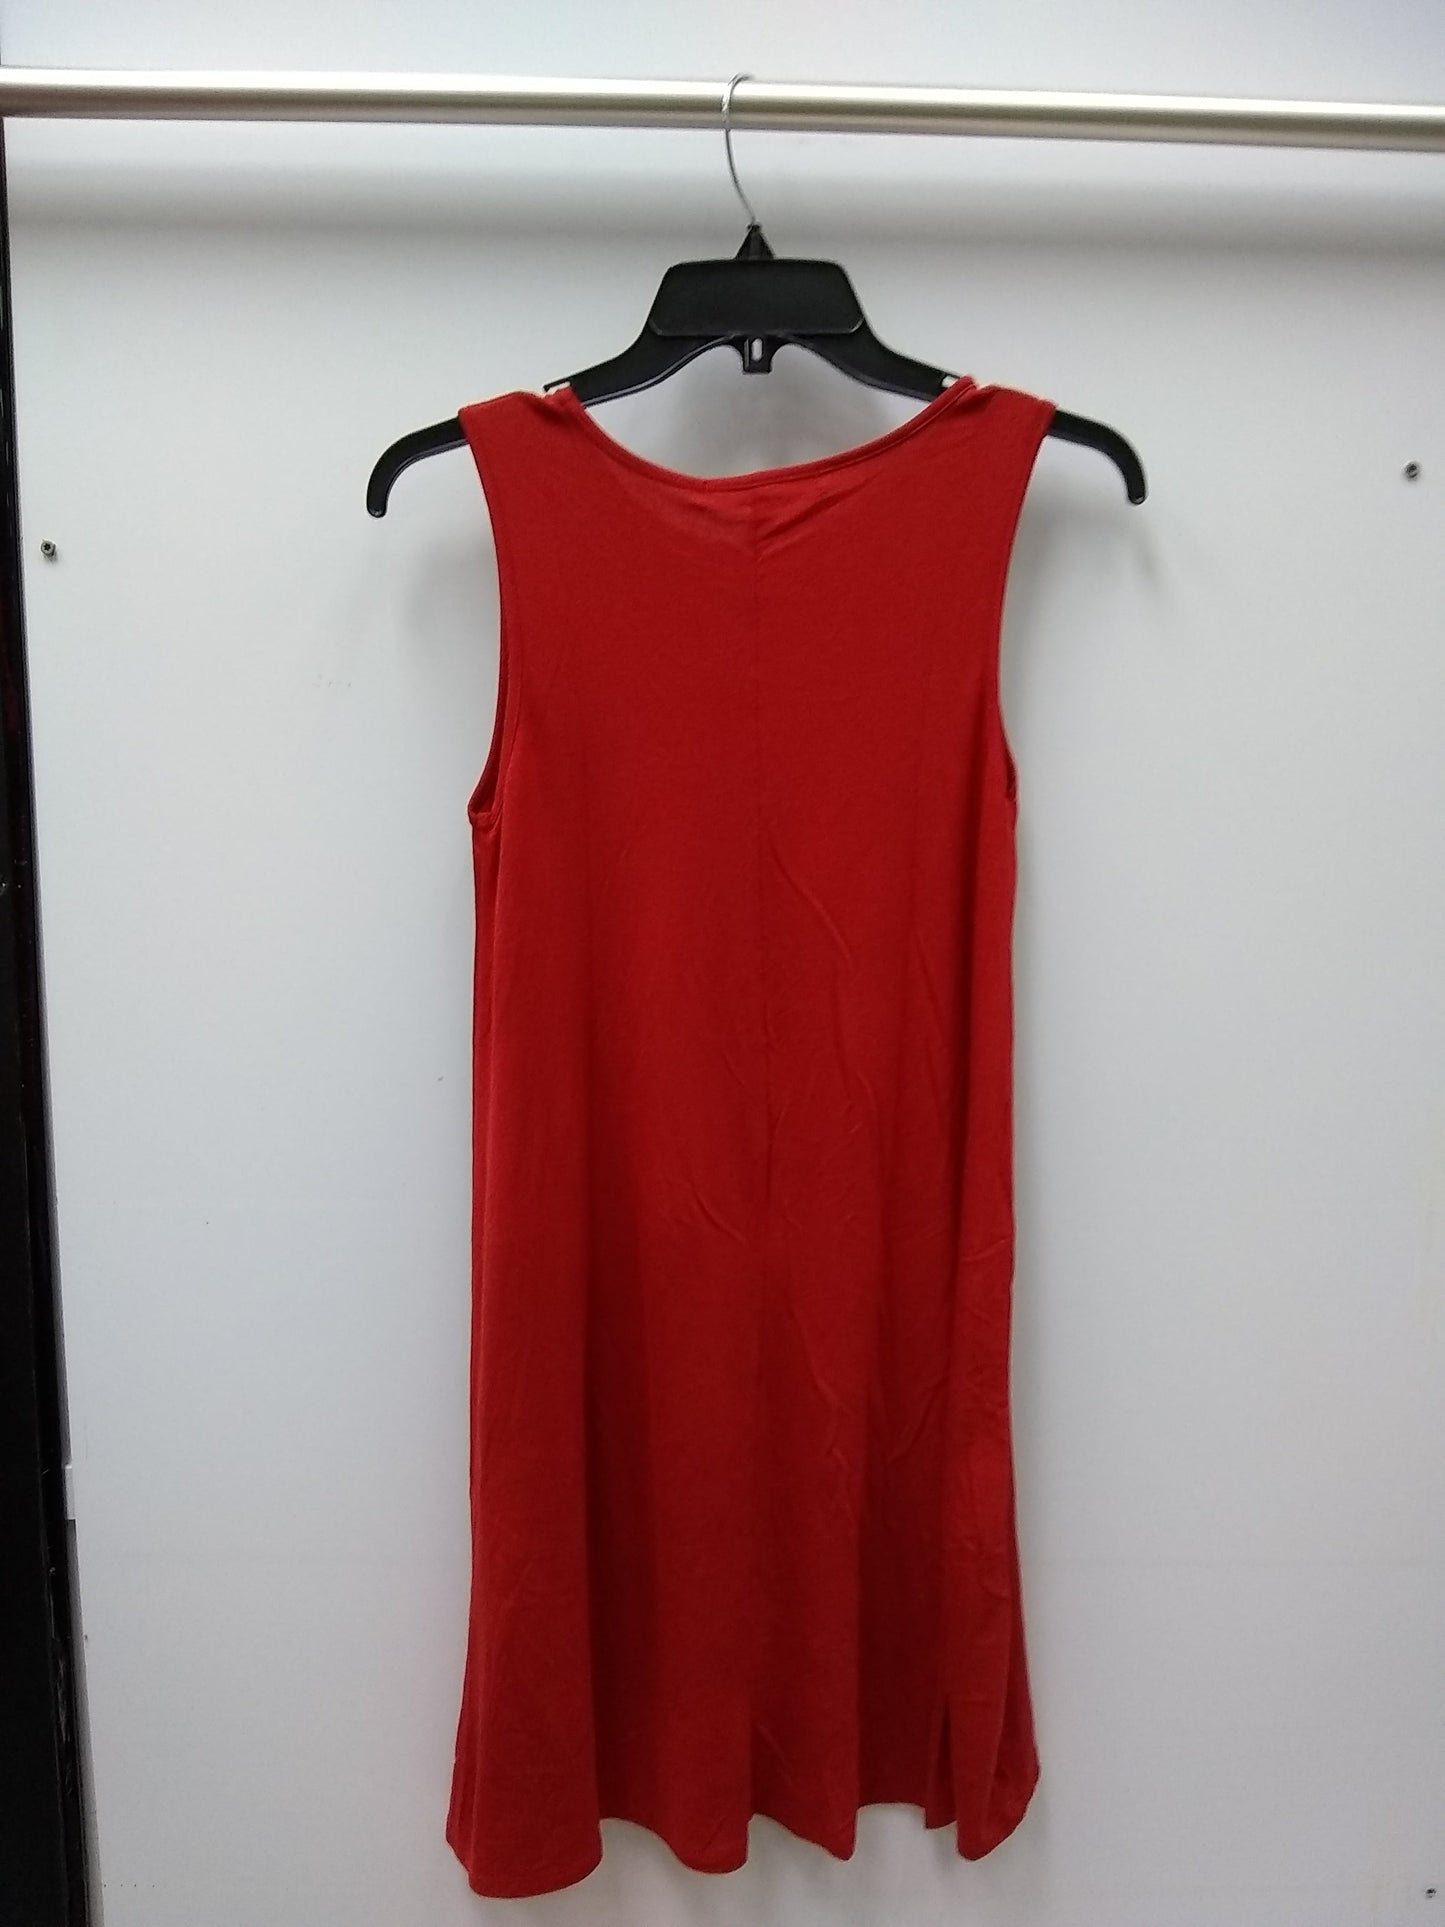 One Clothing Juniors Sleeveless A-Line Swing Dress Red XS